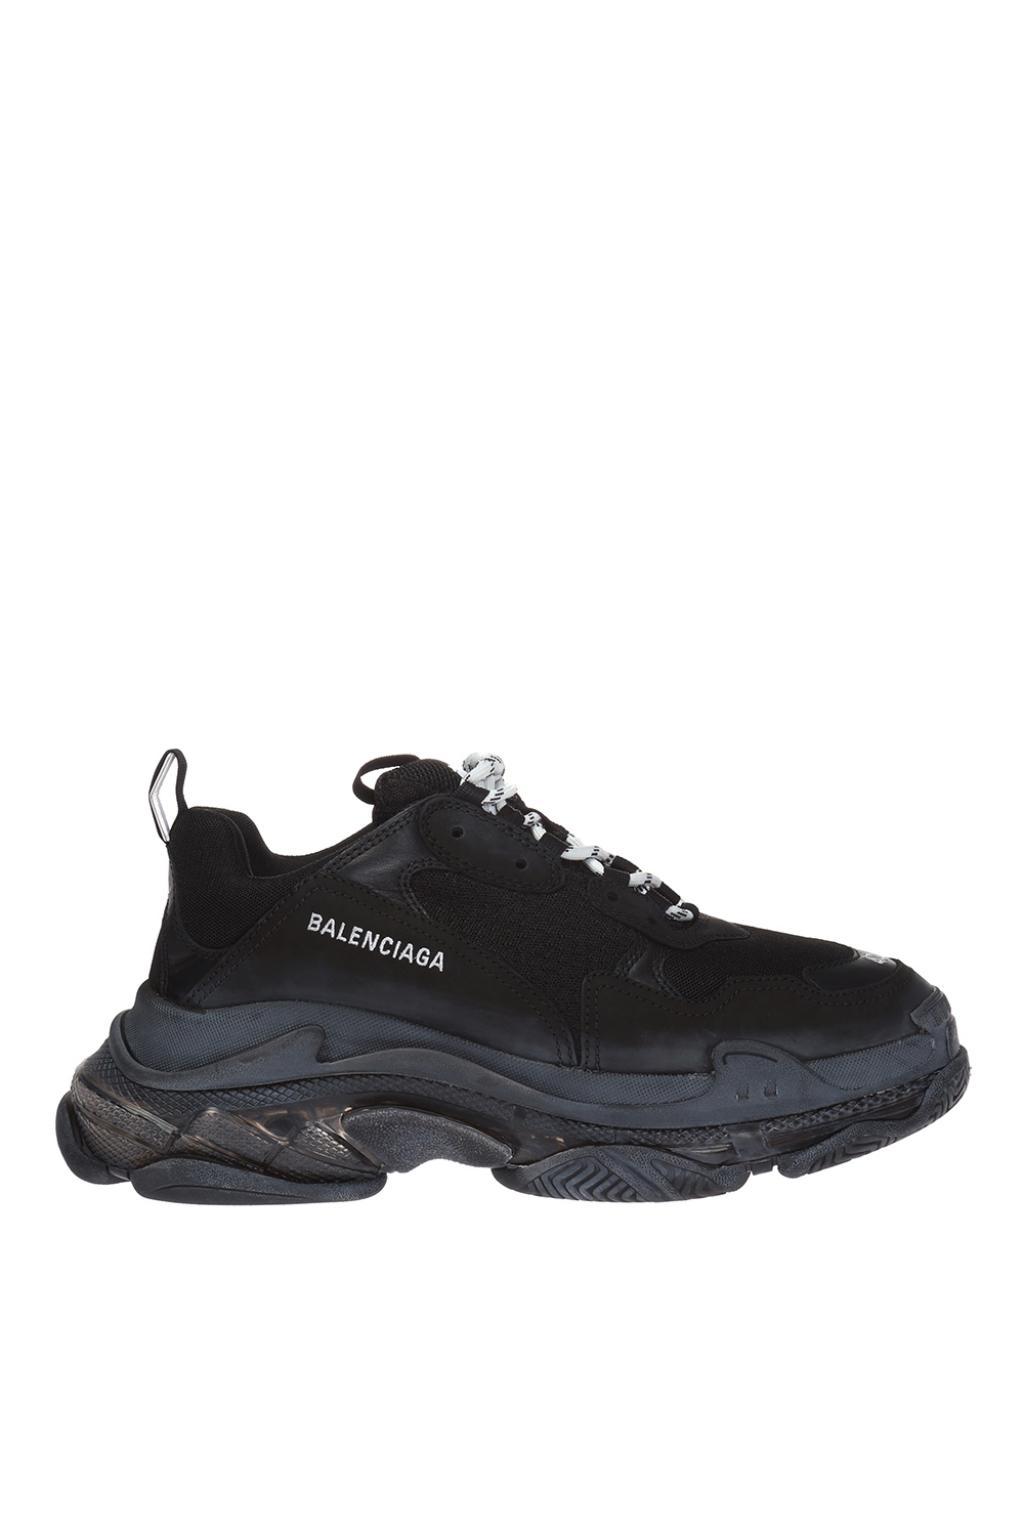 Balenciaga Leather 'triple S' Sneakers in Black for Men - Lyst